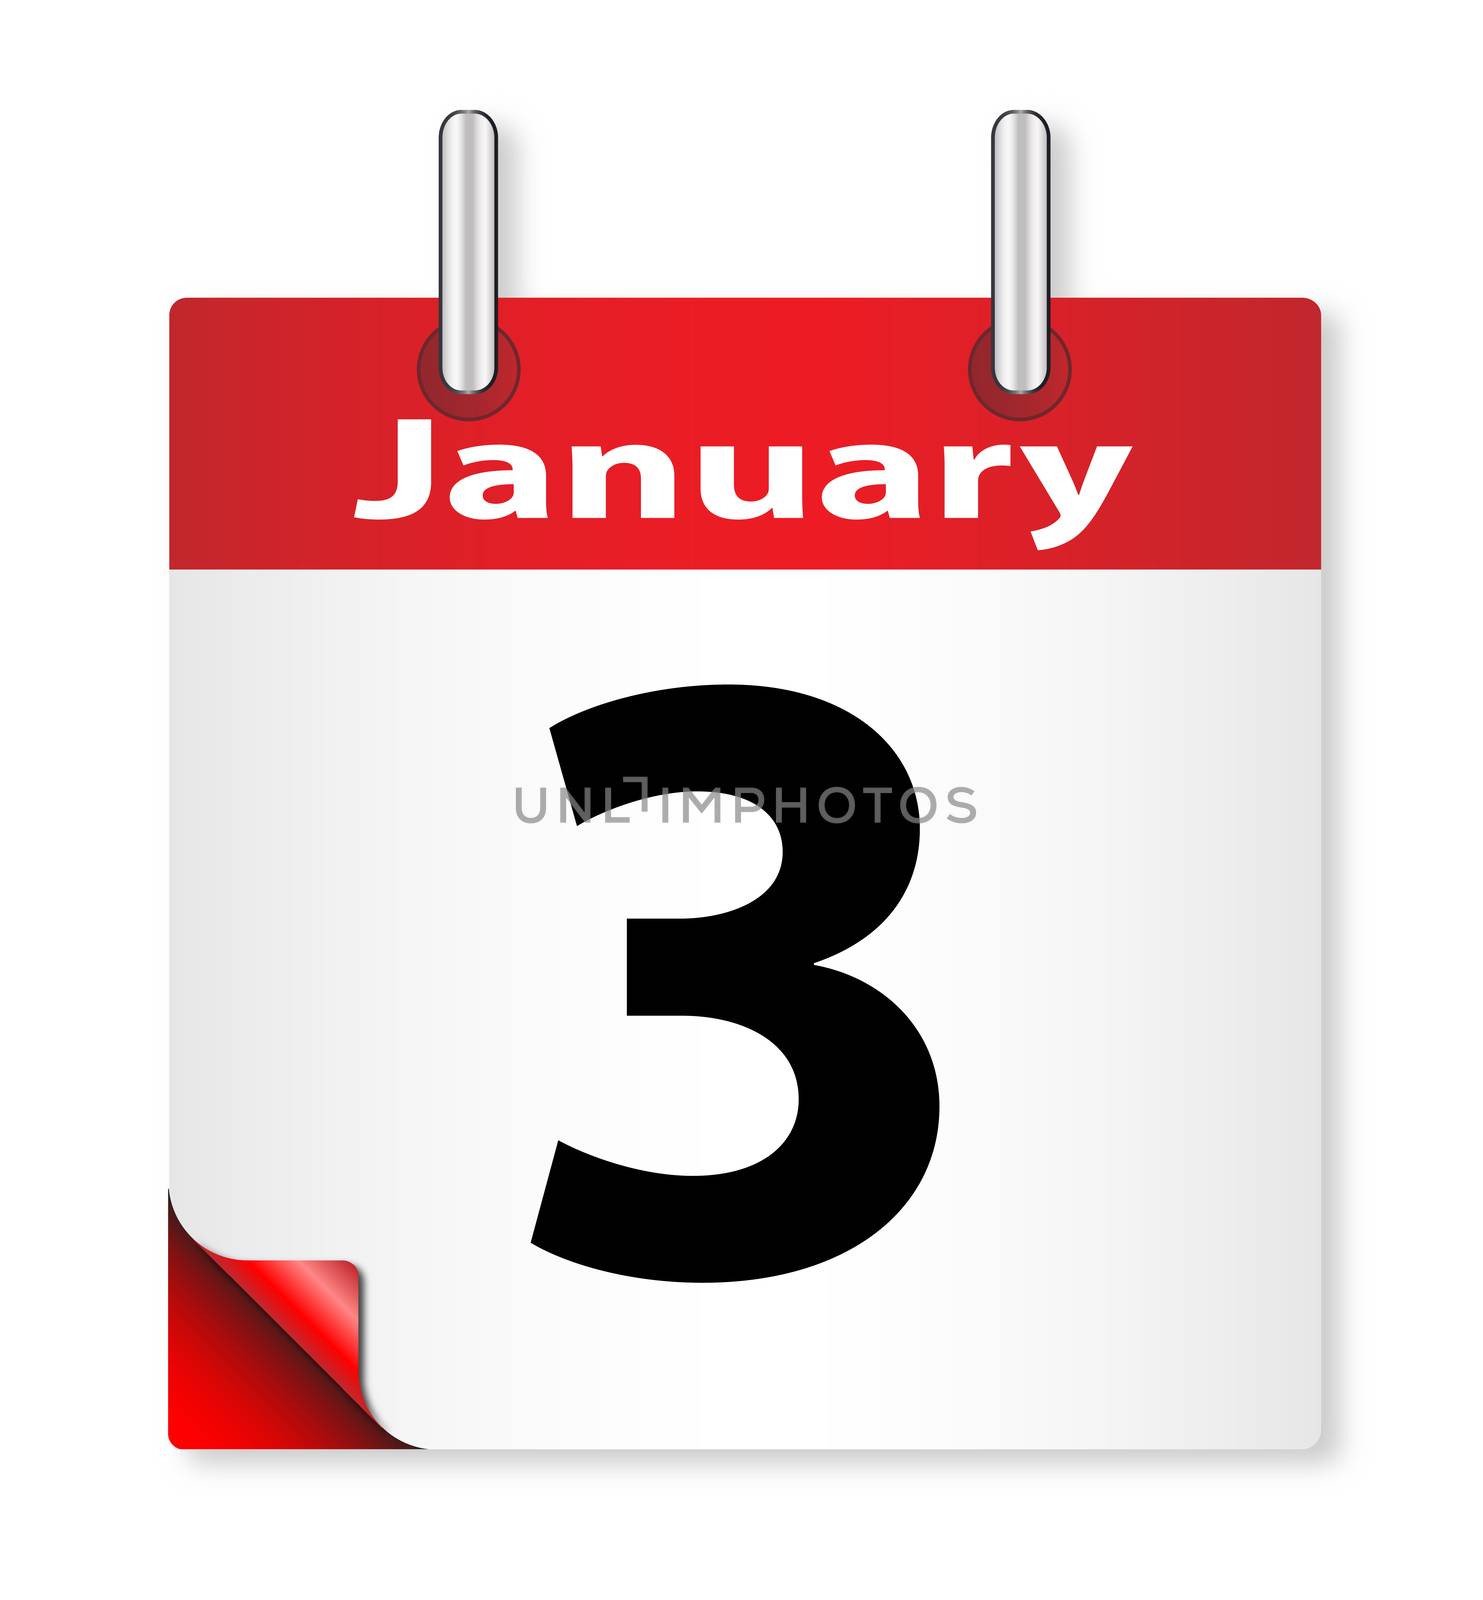 A calender date offering the 3rd January